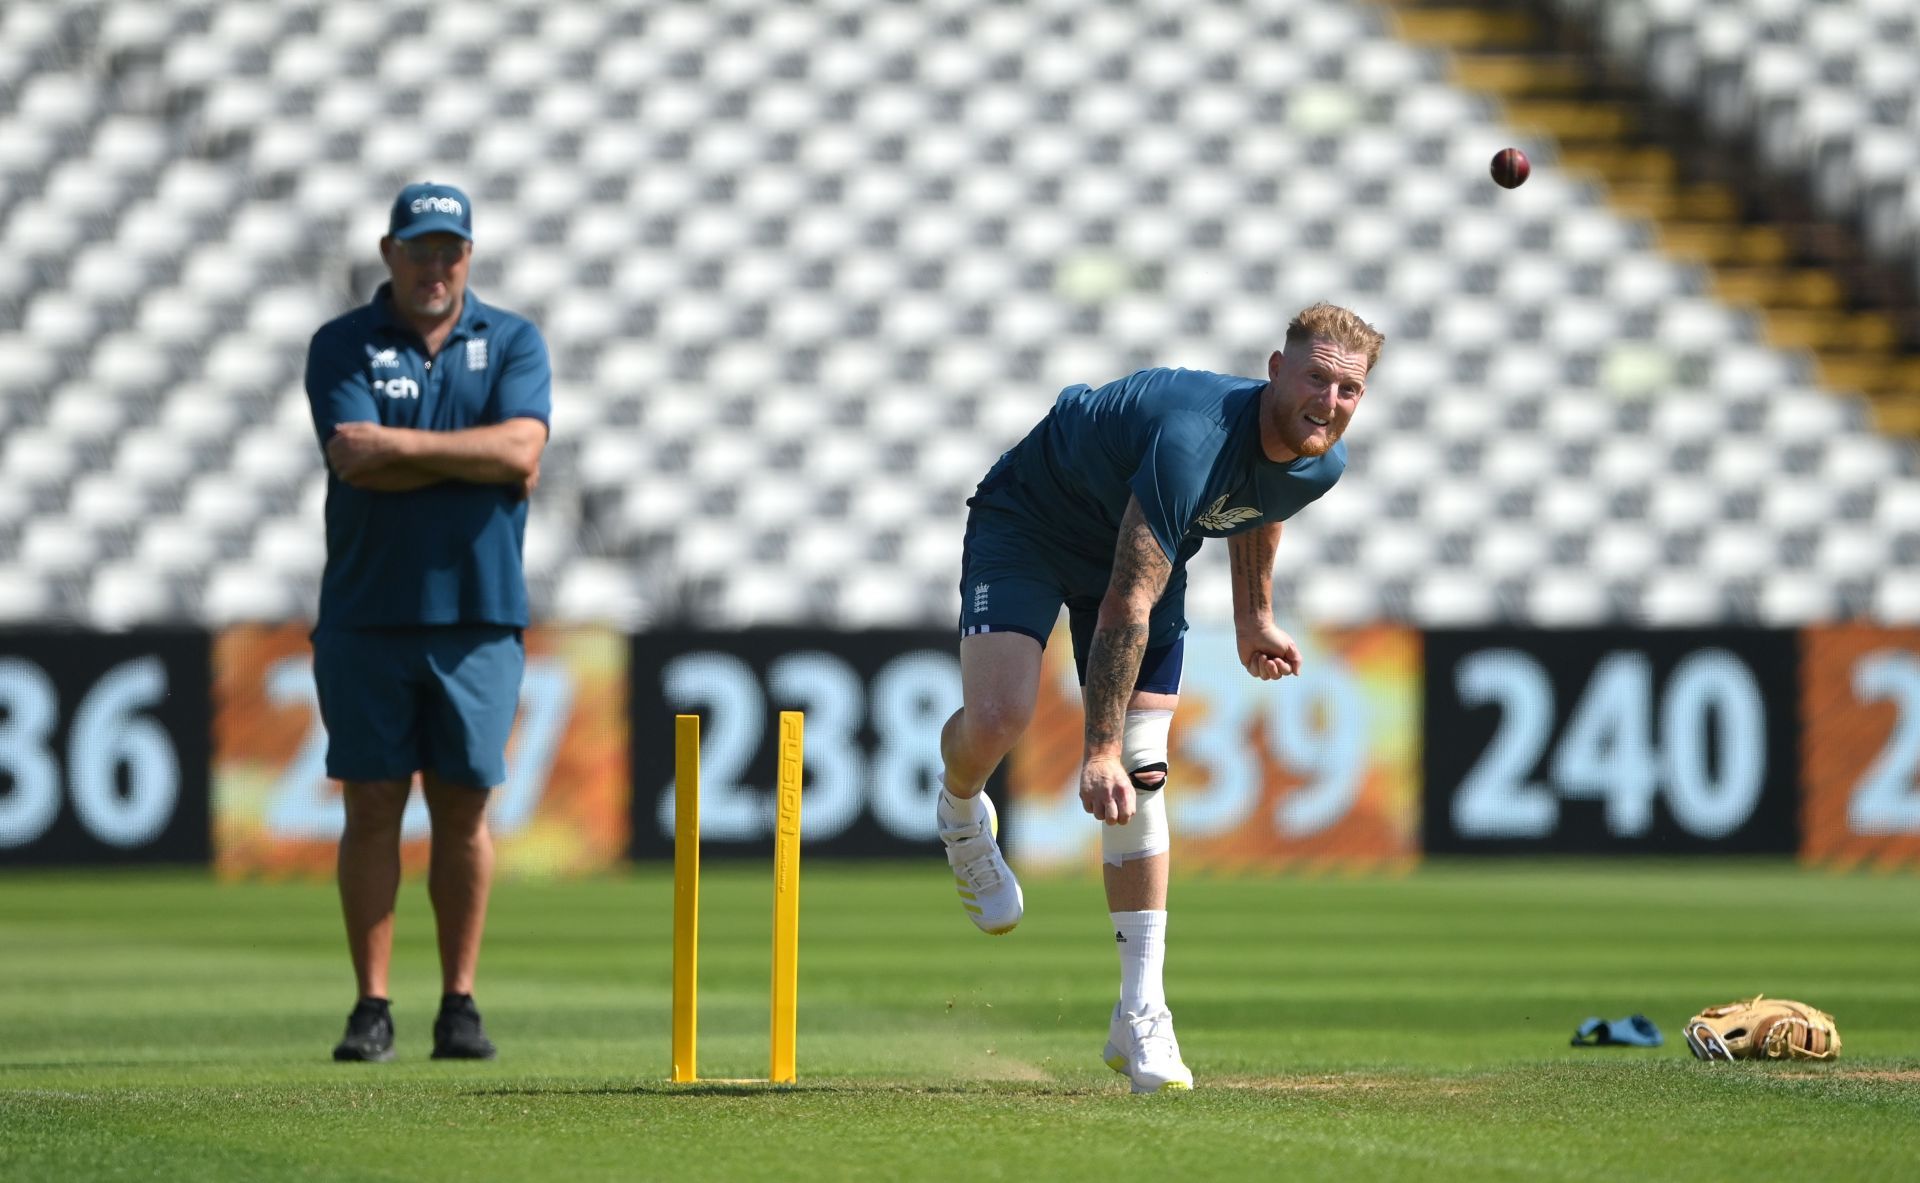 Ben Stokes bowling (Credits: Getty)